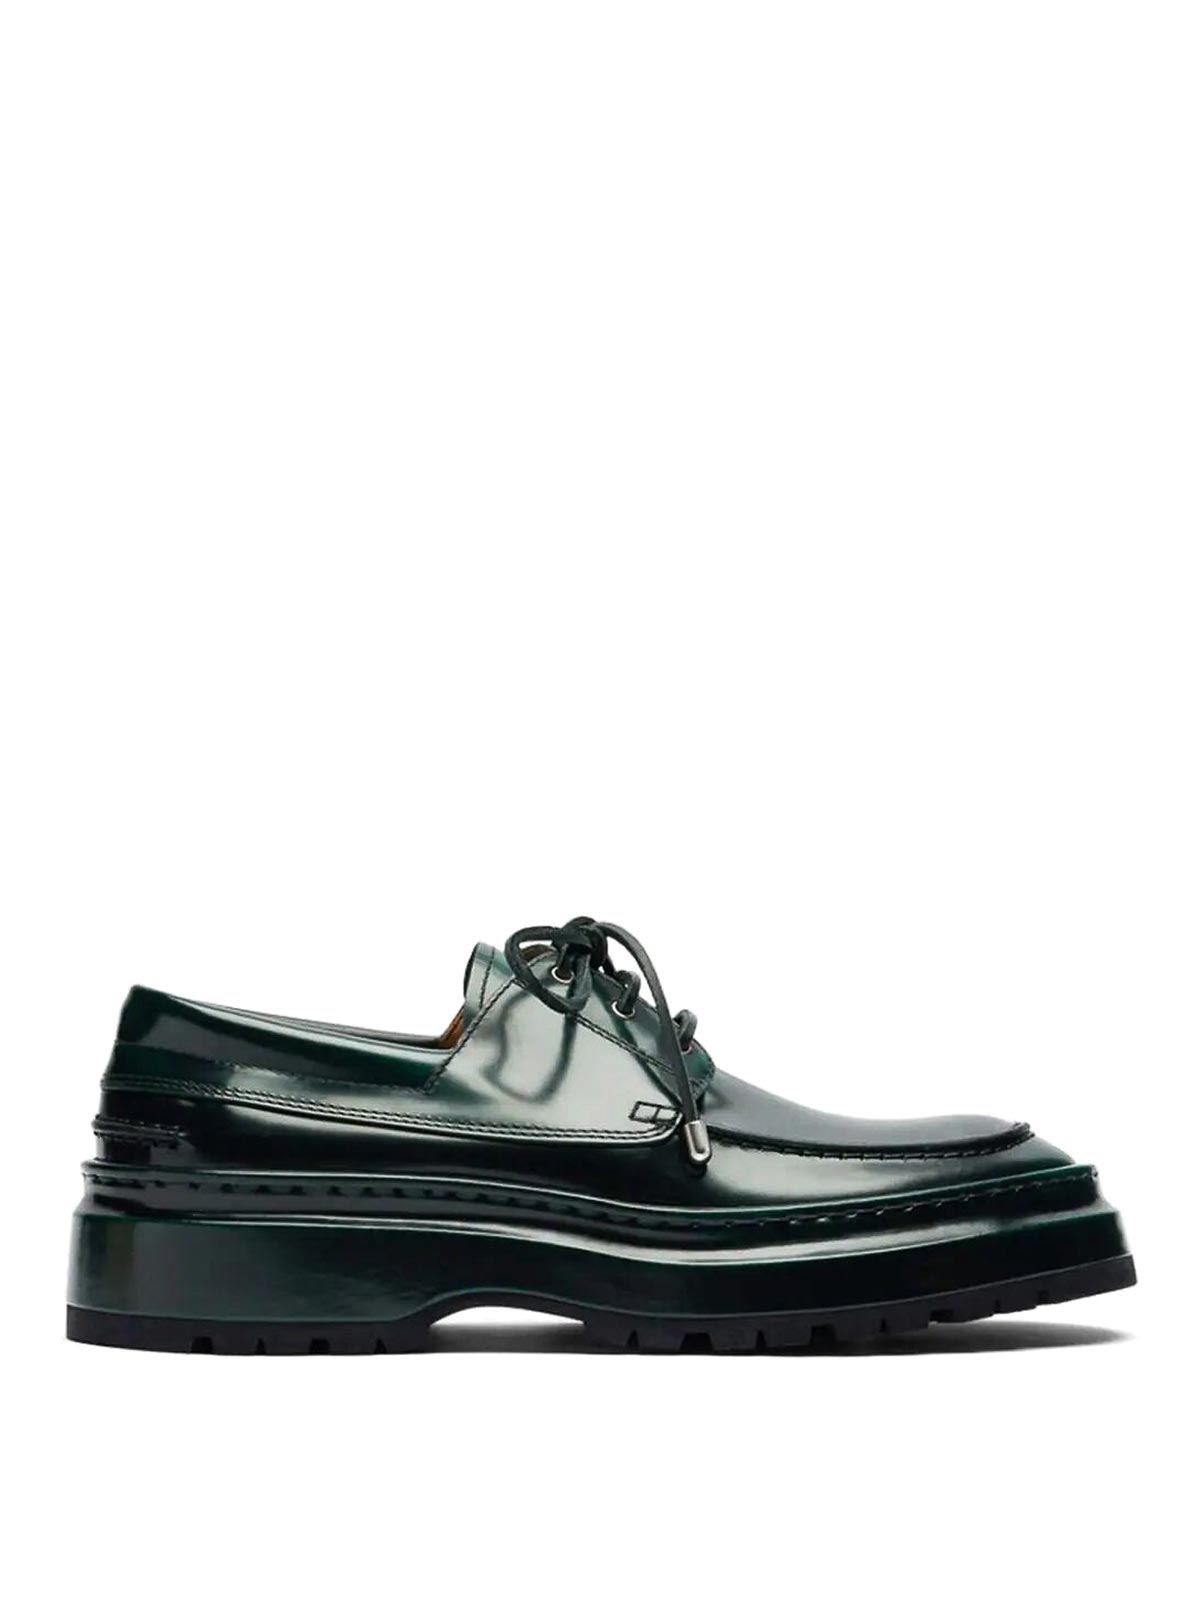 Jacquemus Les Bateau Pavane Loafers In Green